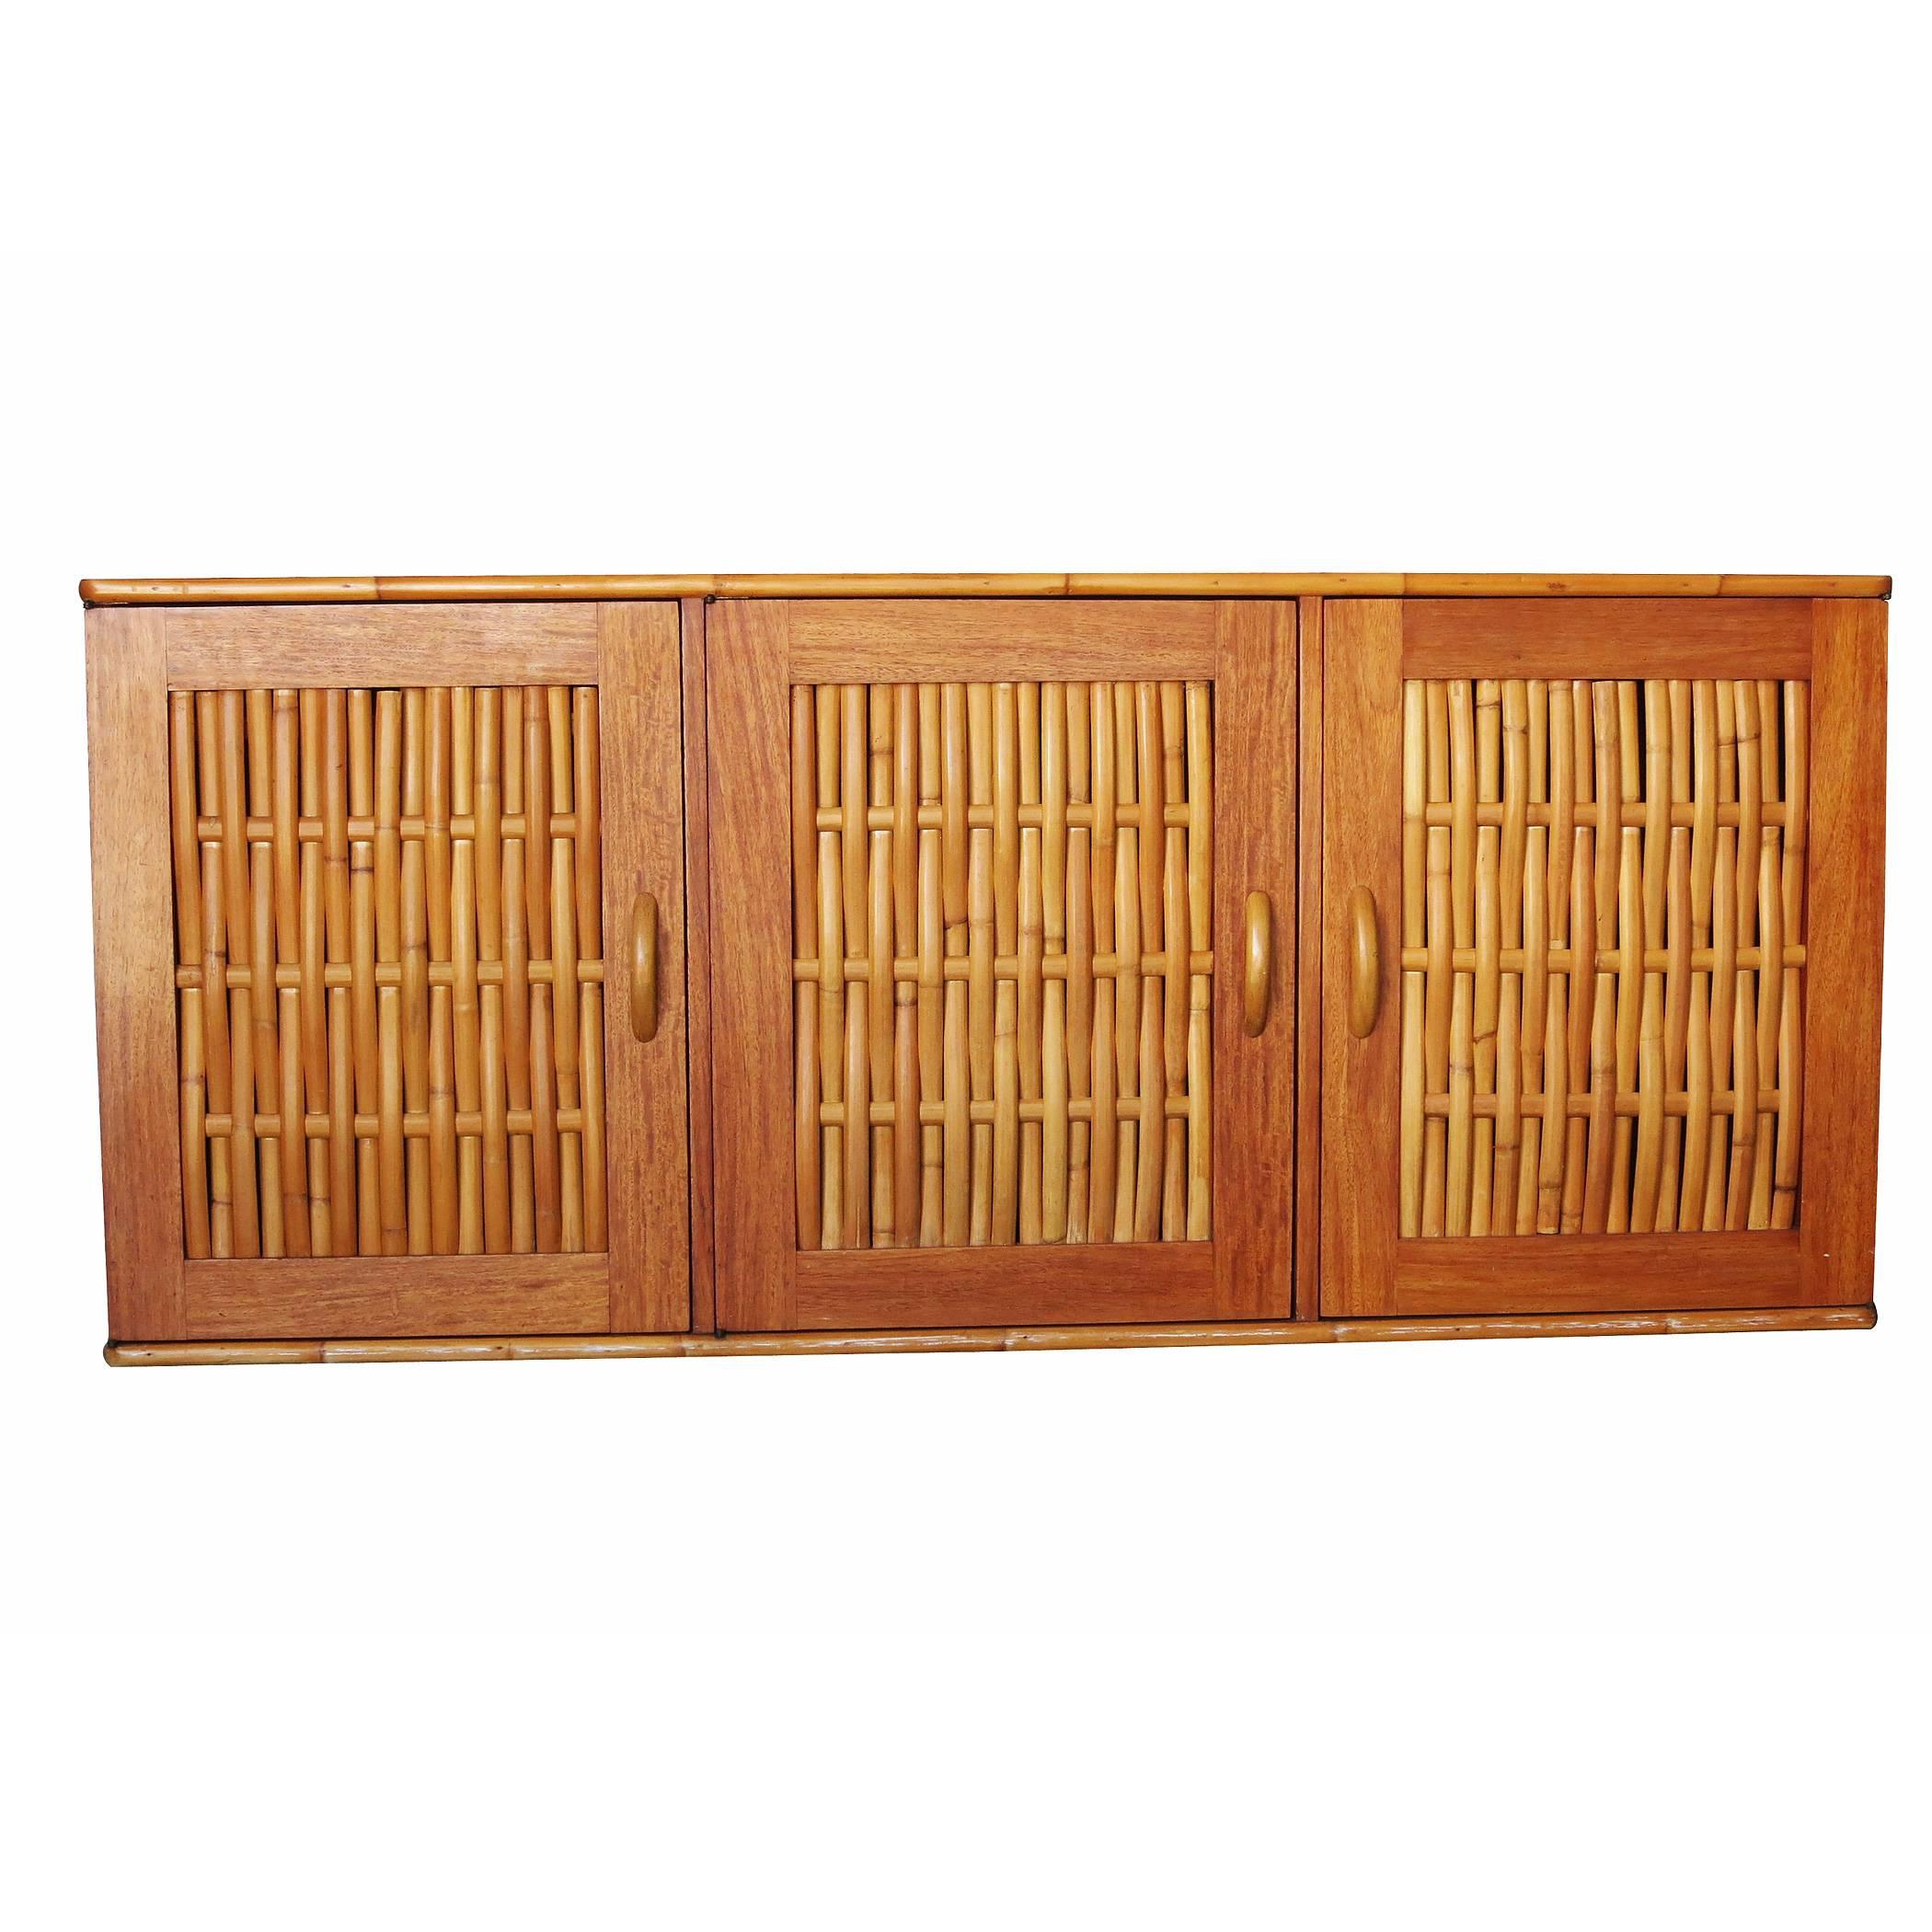 Rare Restored Midcentury Rattan and Mahogany Dining Set with Sideboard 2